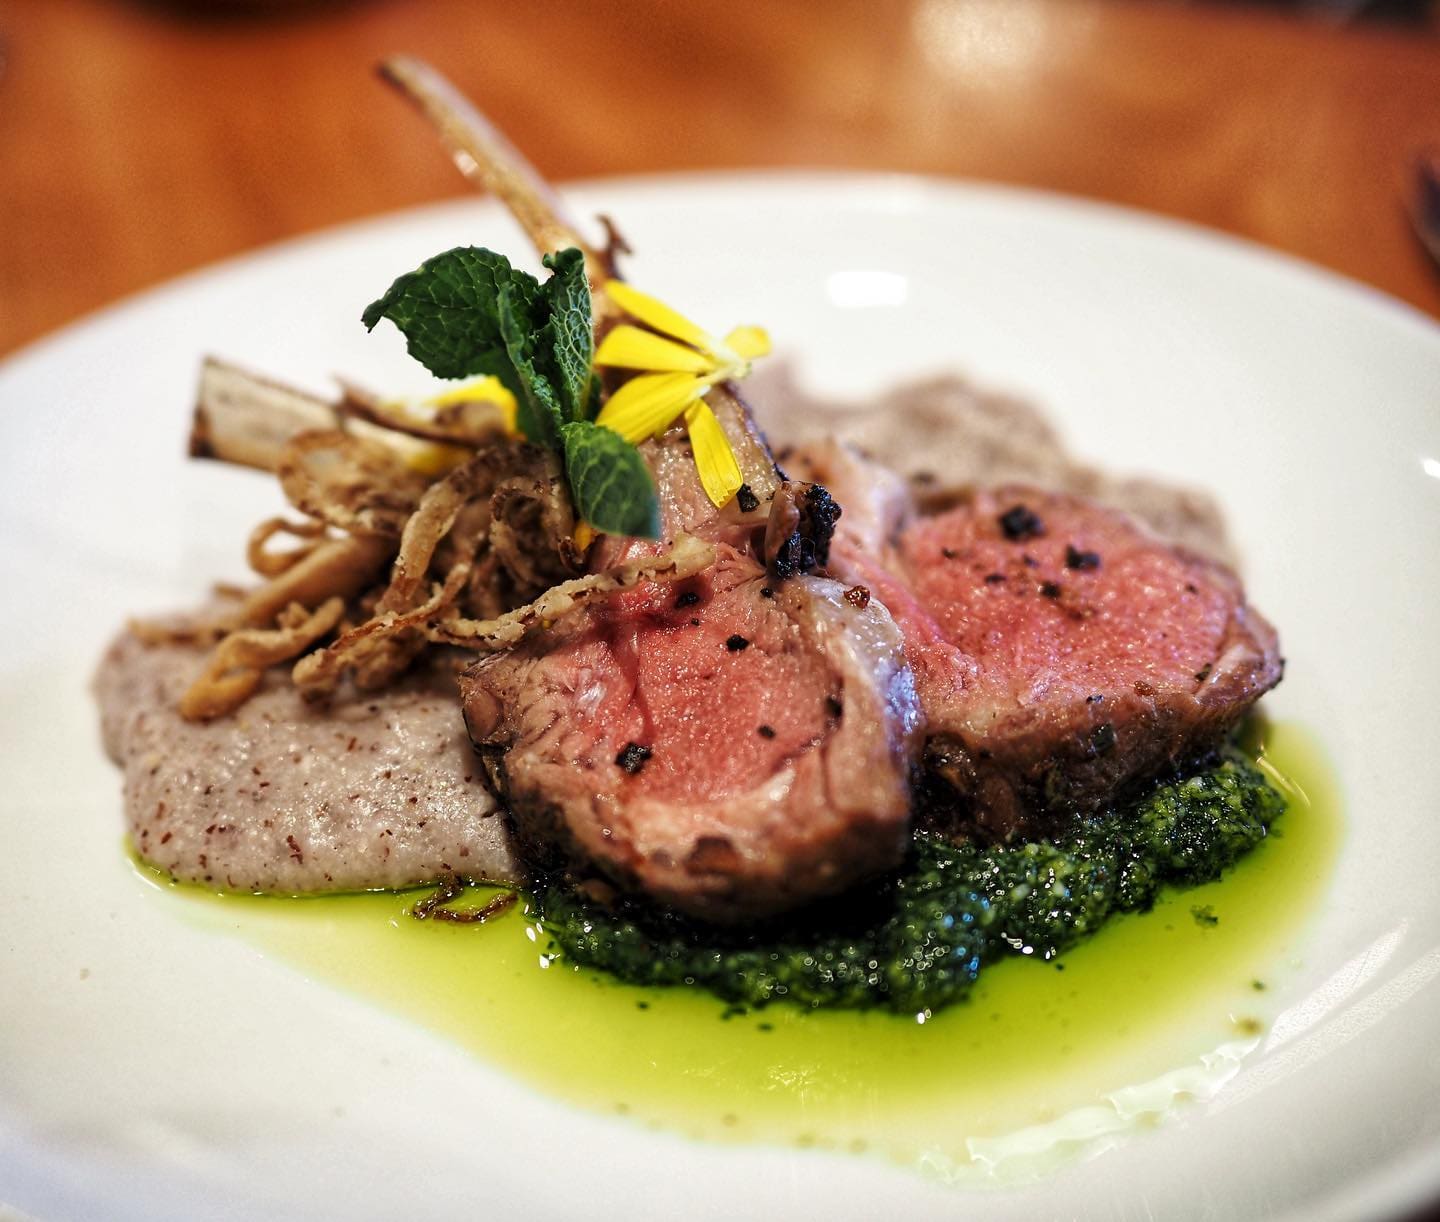 Featured image for “3 courses for $30: Newark Restaurant Week returns”